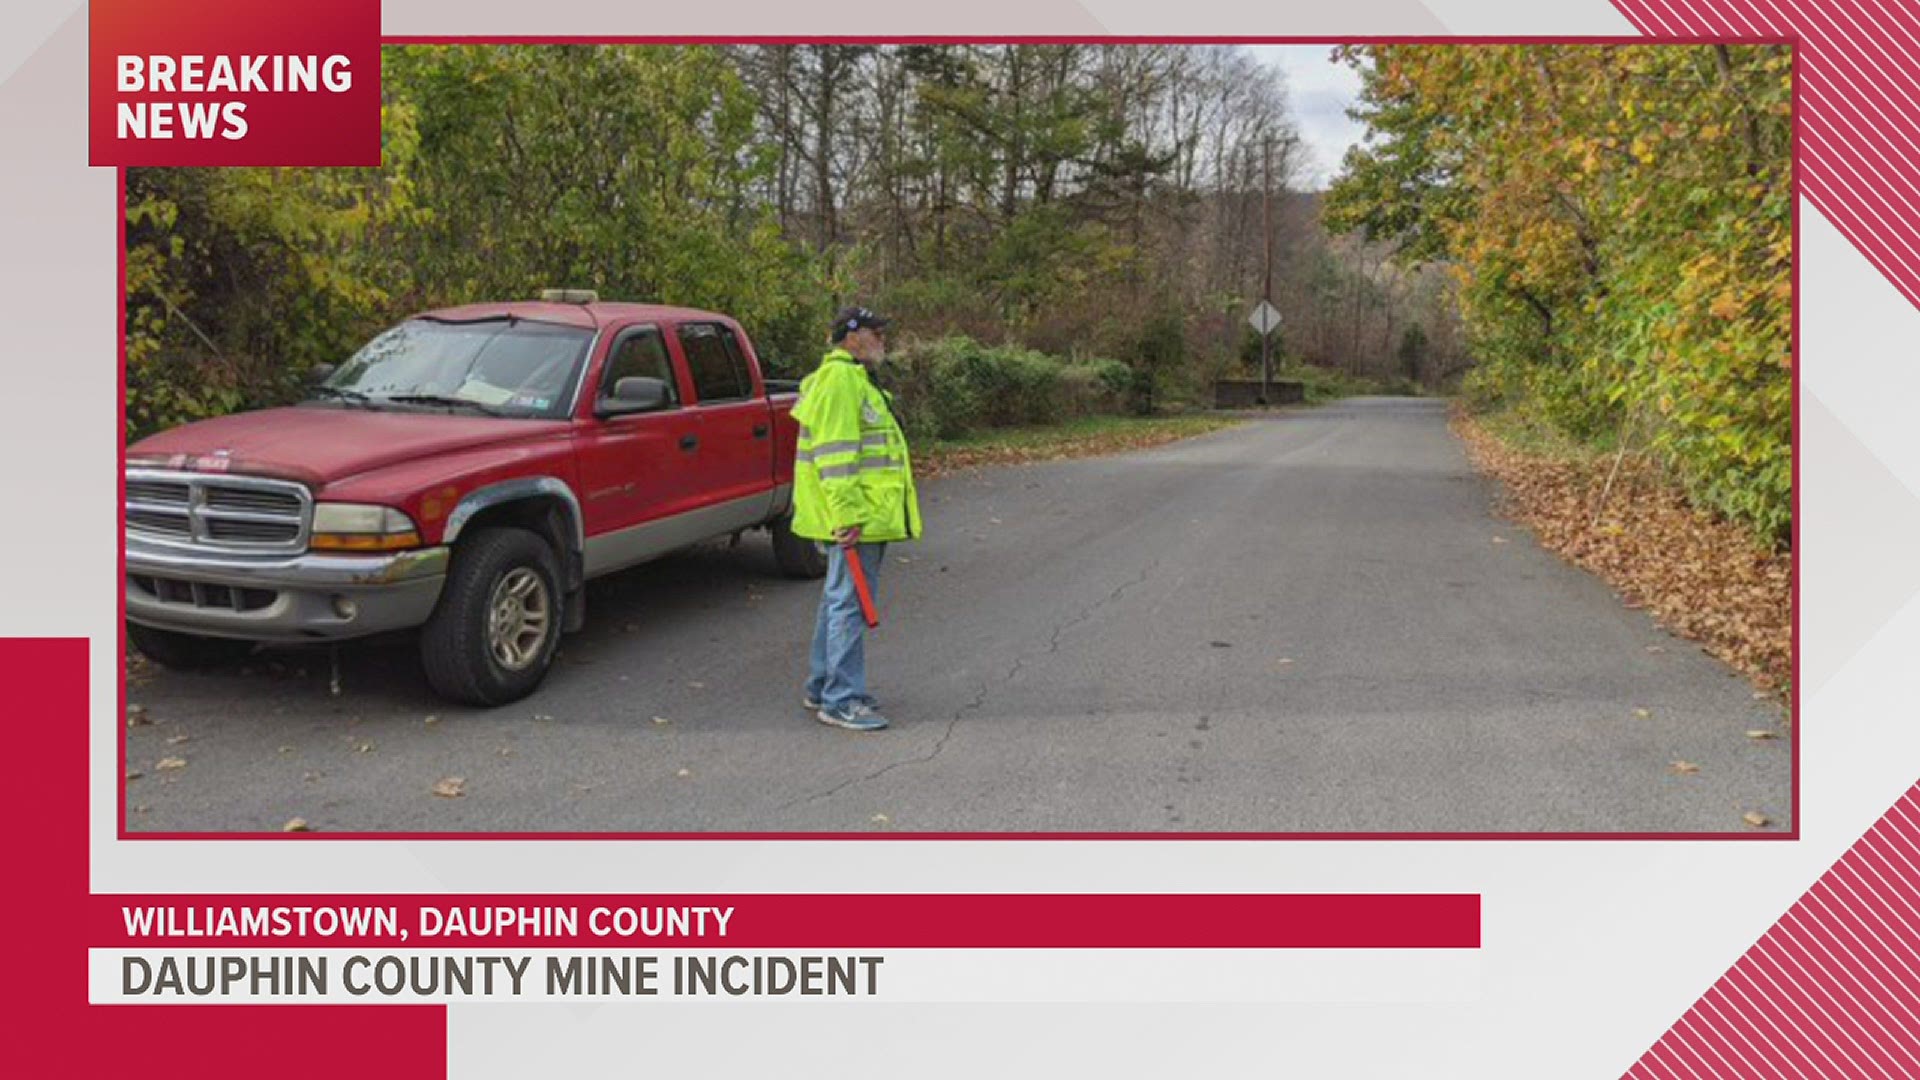 Williamstown, Dauphin County mine incident involves a coal worker.